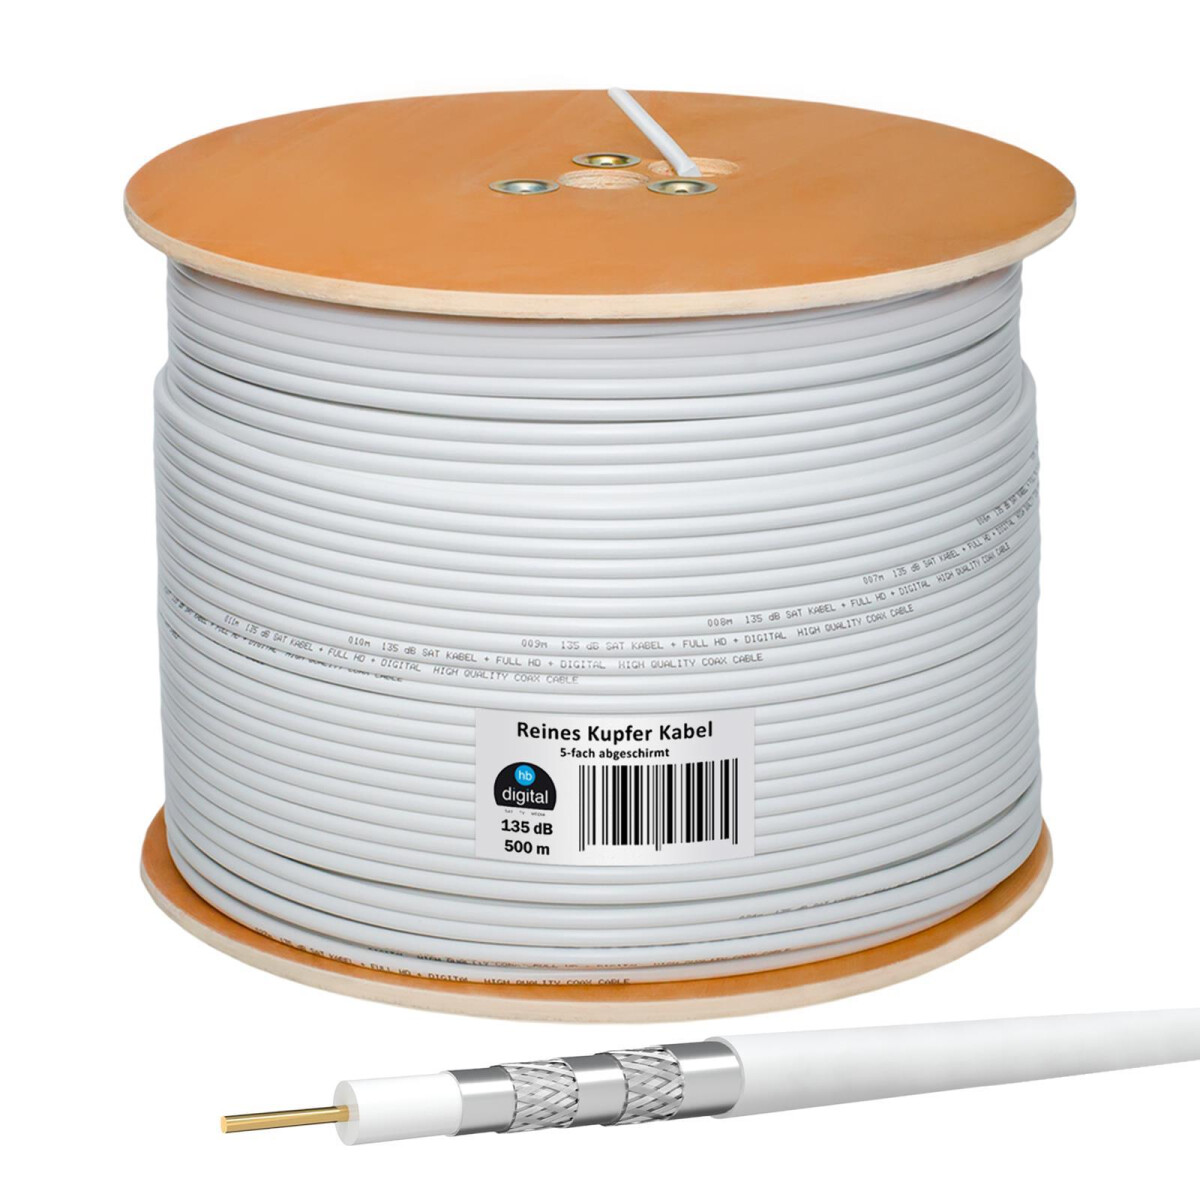 500m 135dB Satellite Cable Copper Coaxial Cable Digital Aerial Cable 4K UHD 3D Class A 